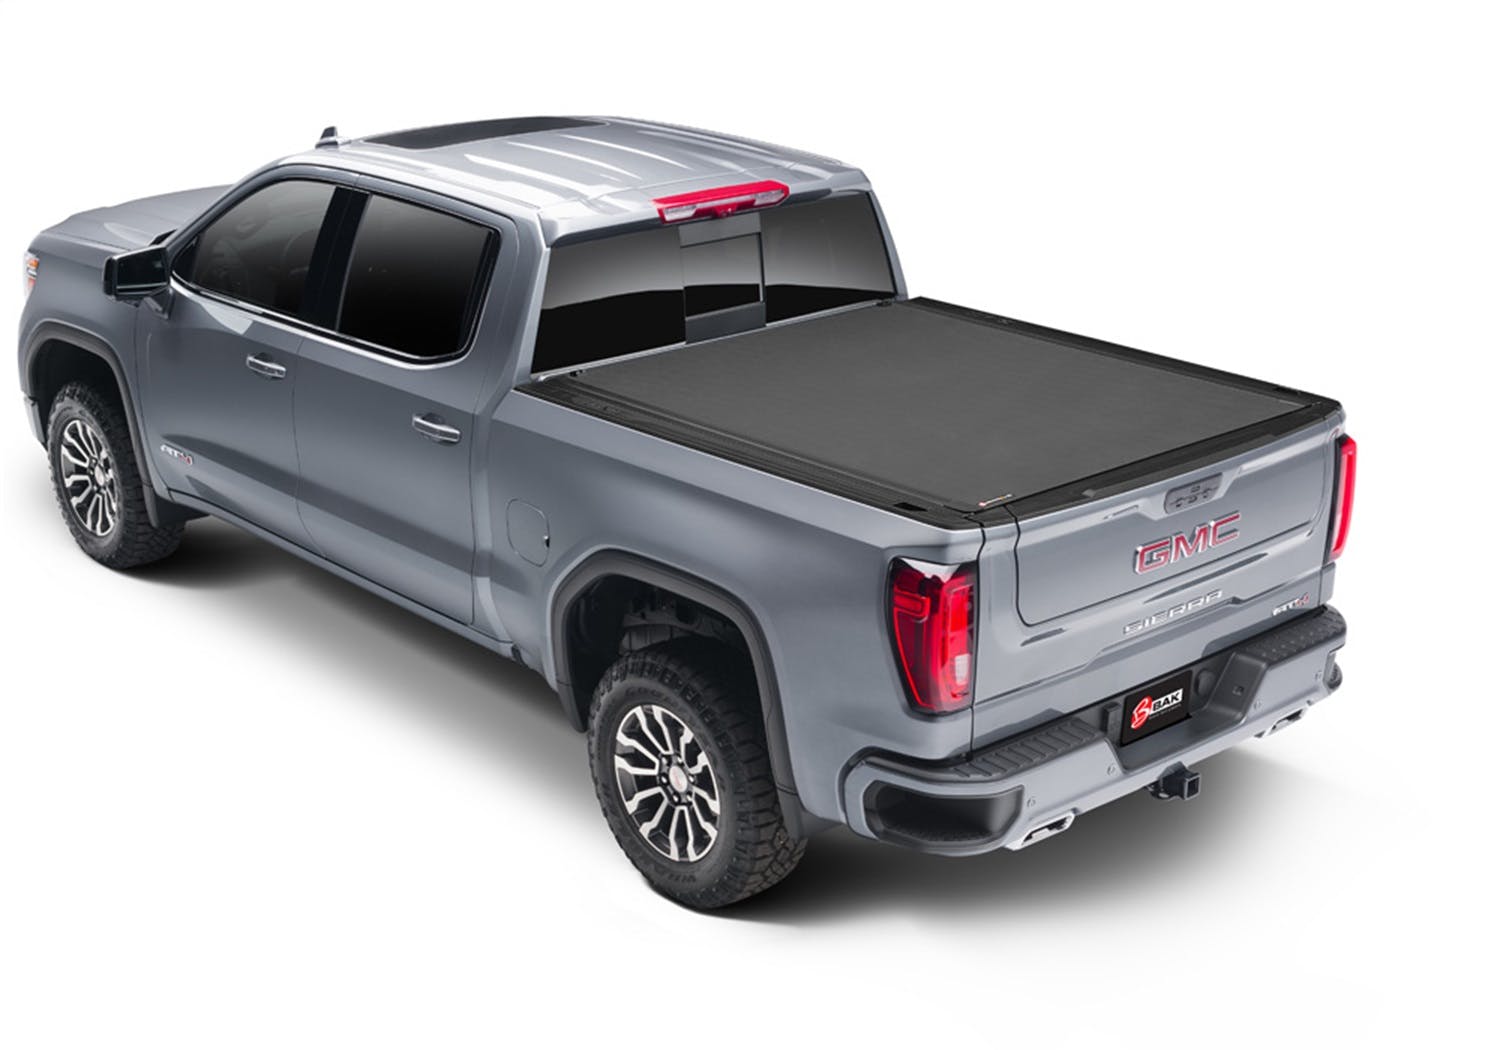 BAK Industries 80132 Revolver X4s Hard Rolling Truck Bed Cover